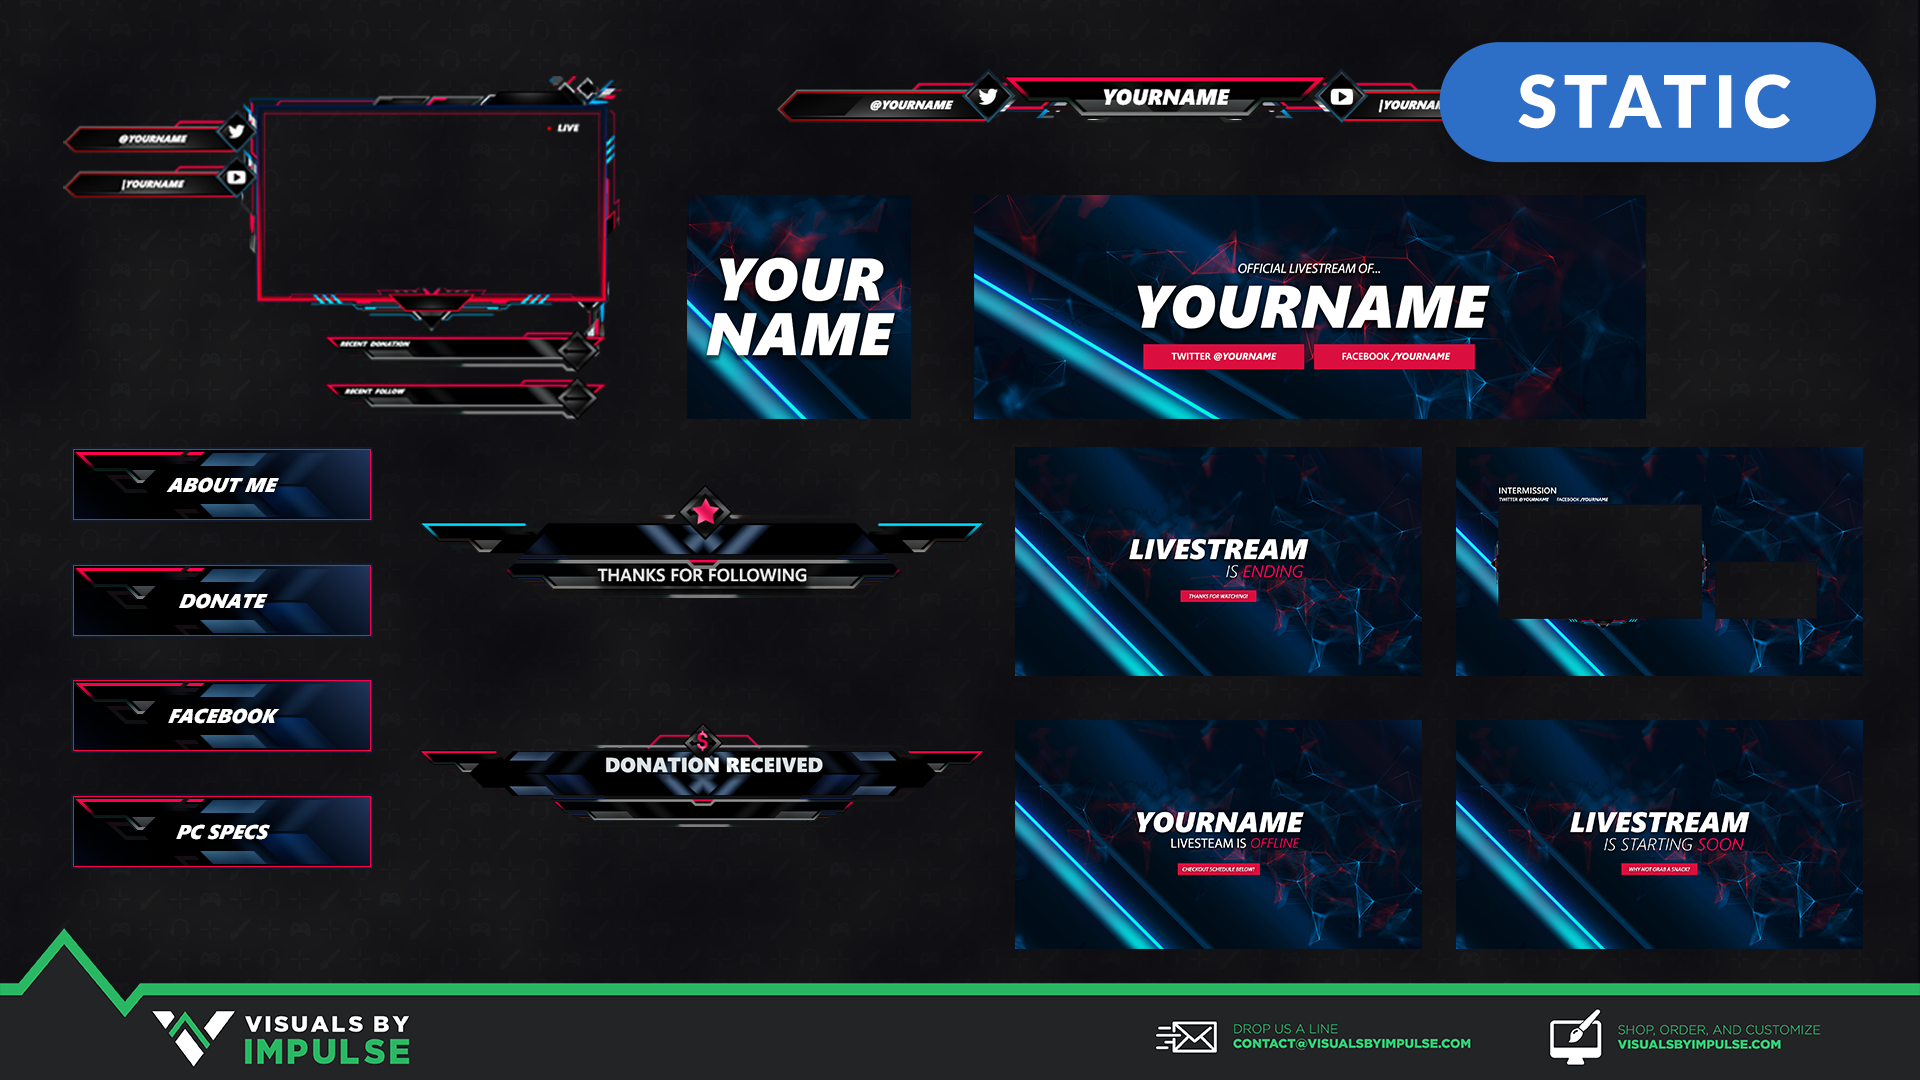 Myth Stream Overlays - Graphics for Twitch and Mixer Streamers - 1920 x 1080 png 1126kB